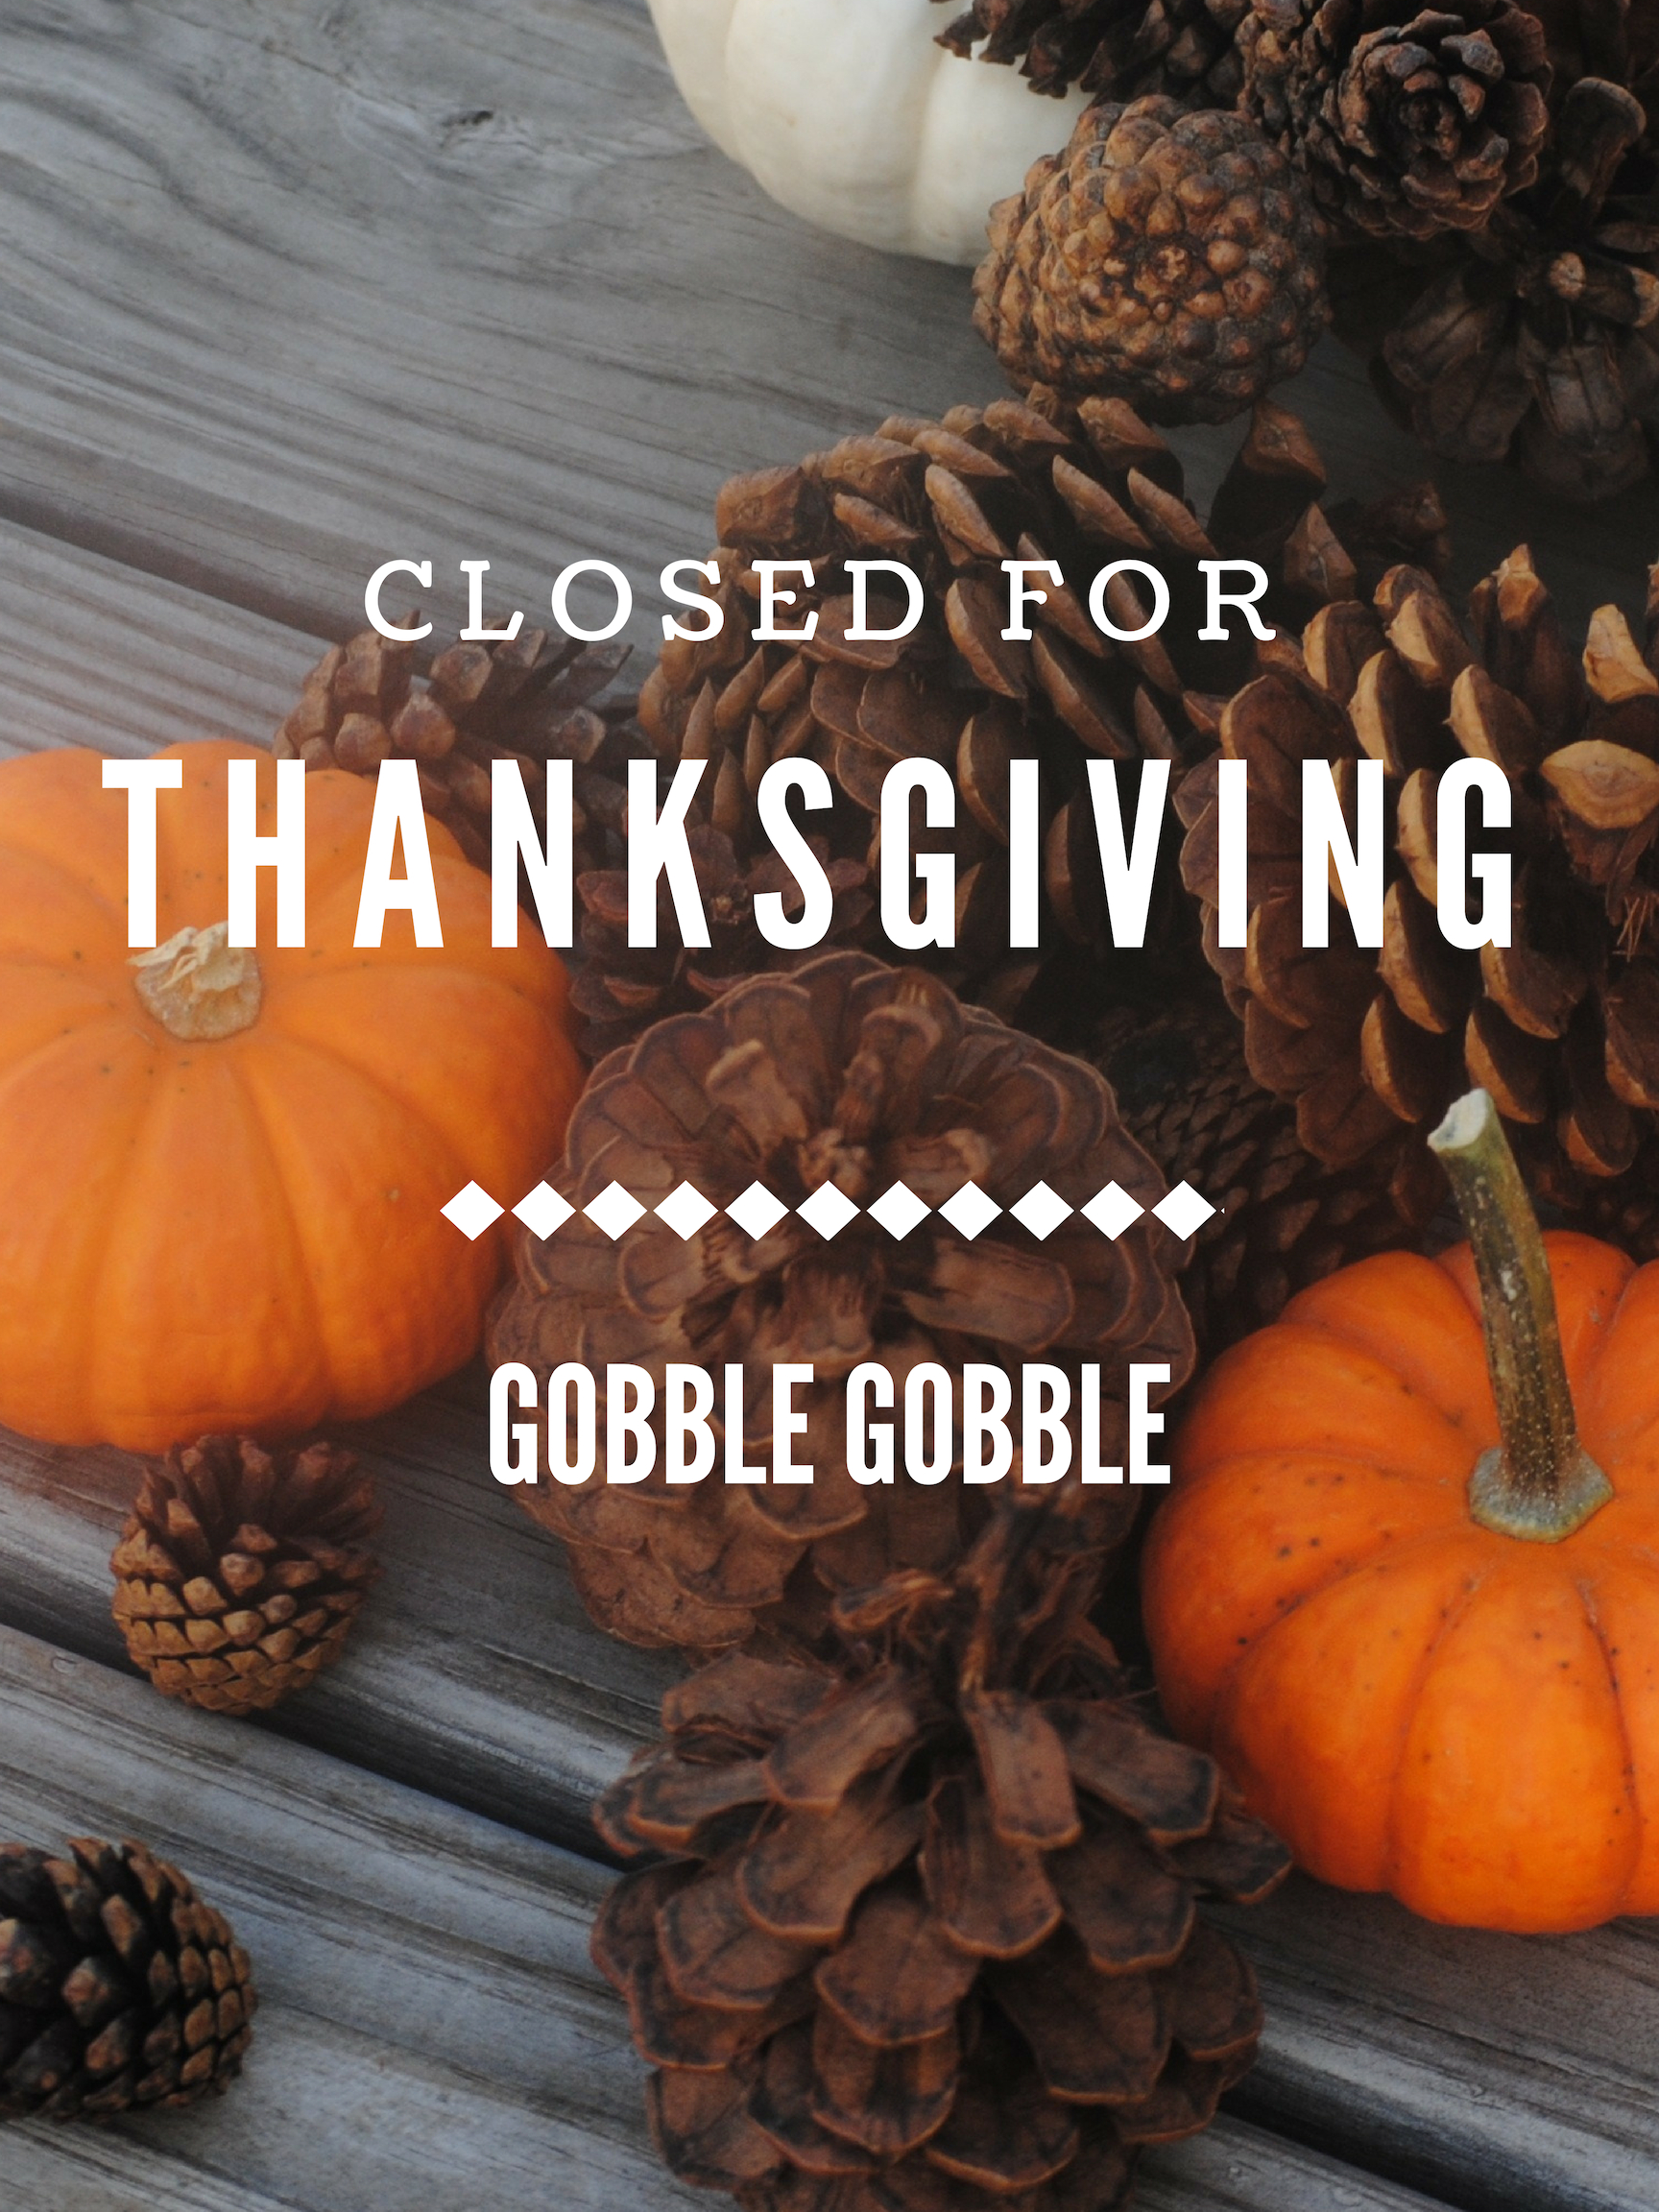 CLOSED for THANKSGIVING!